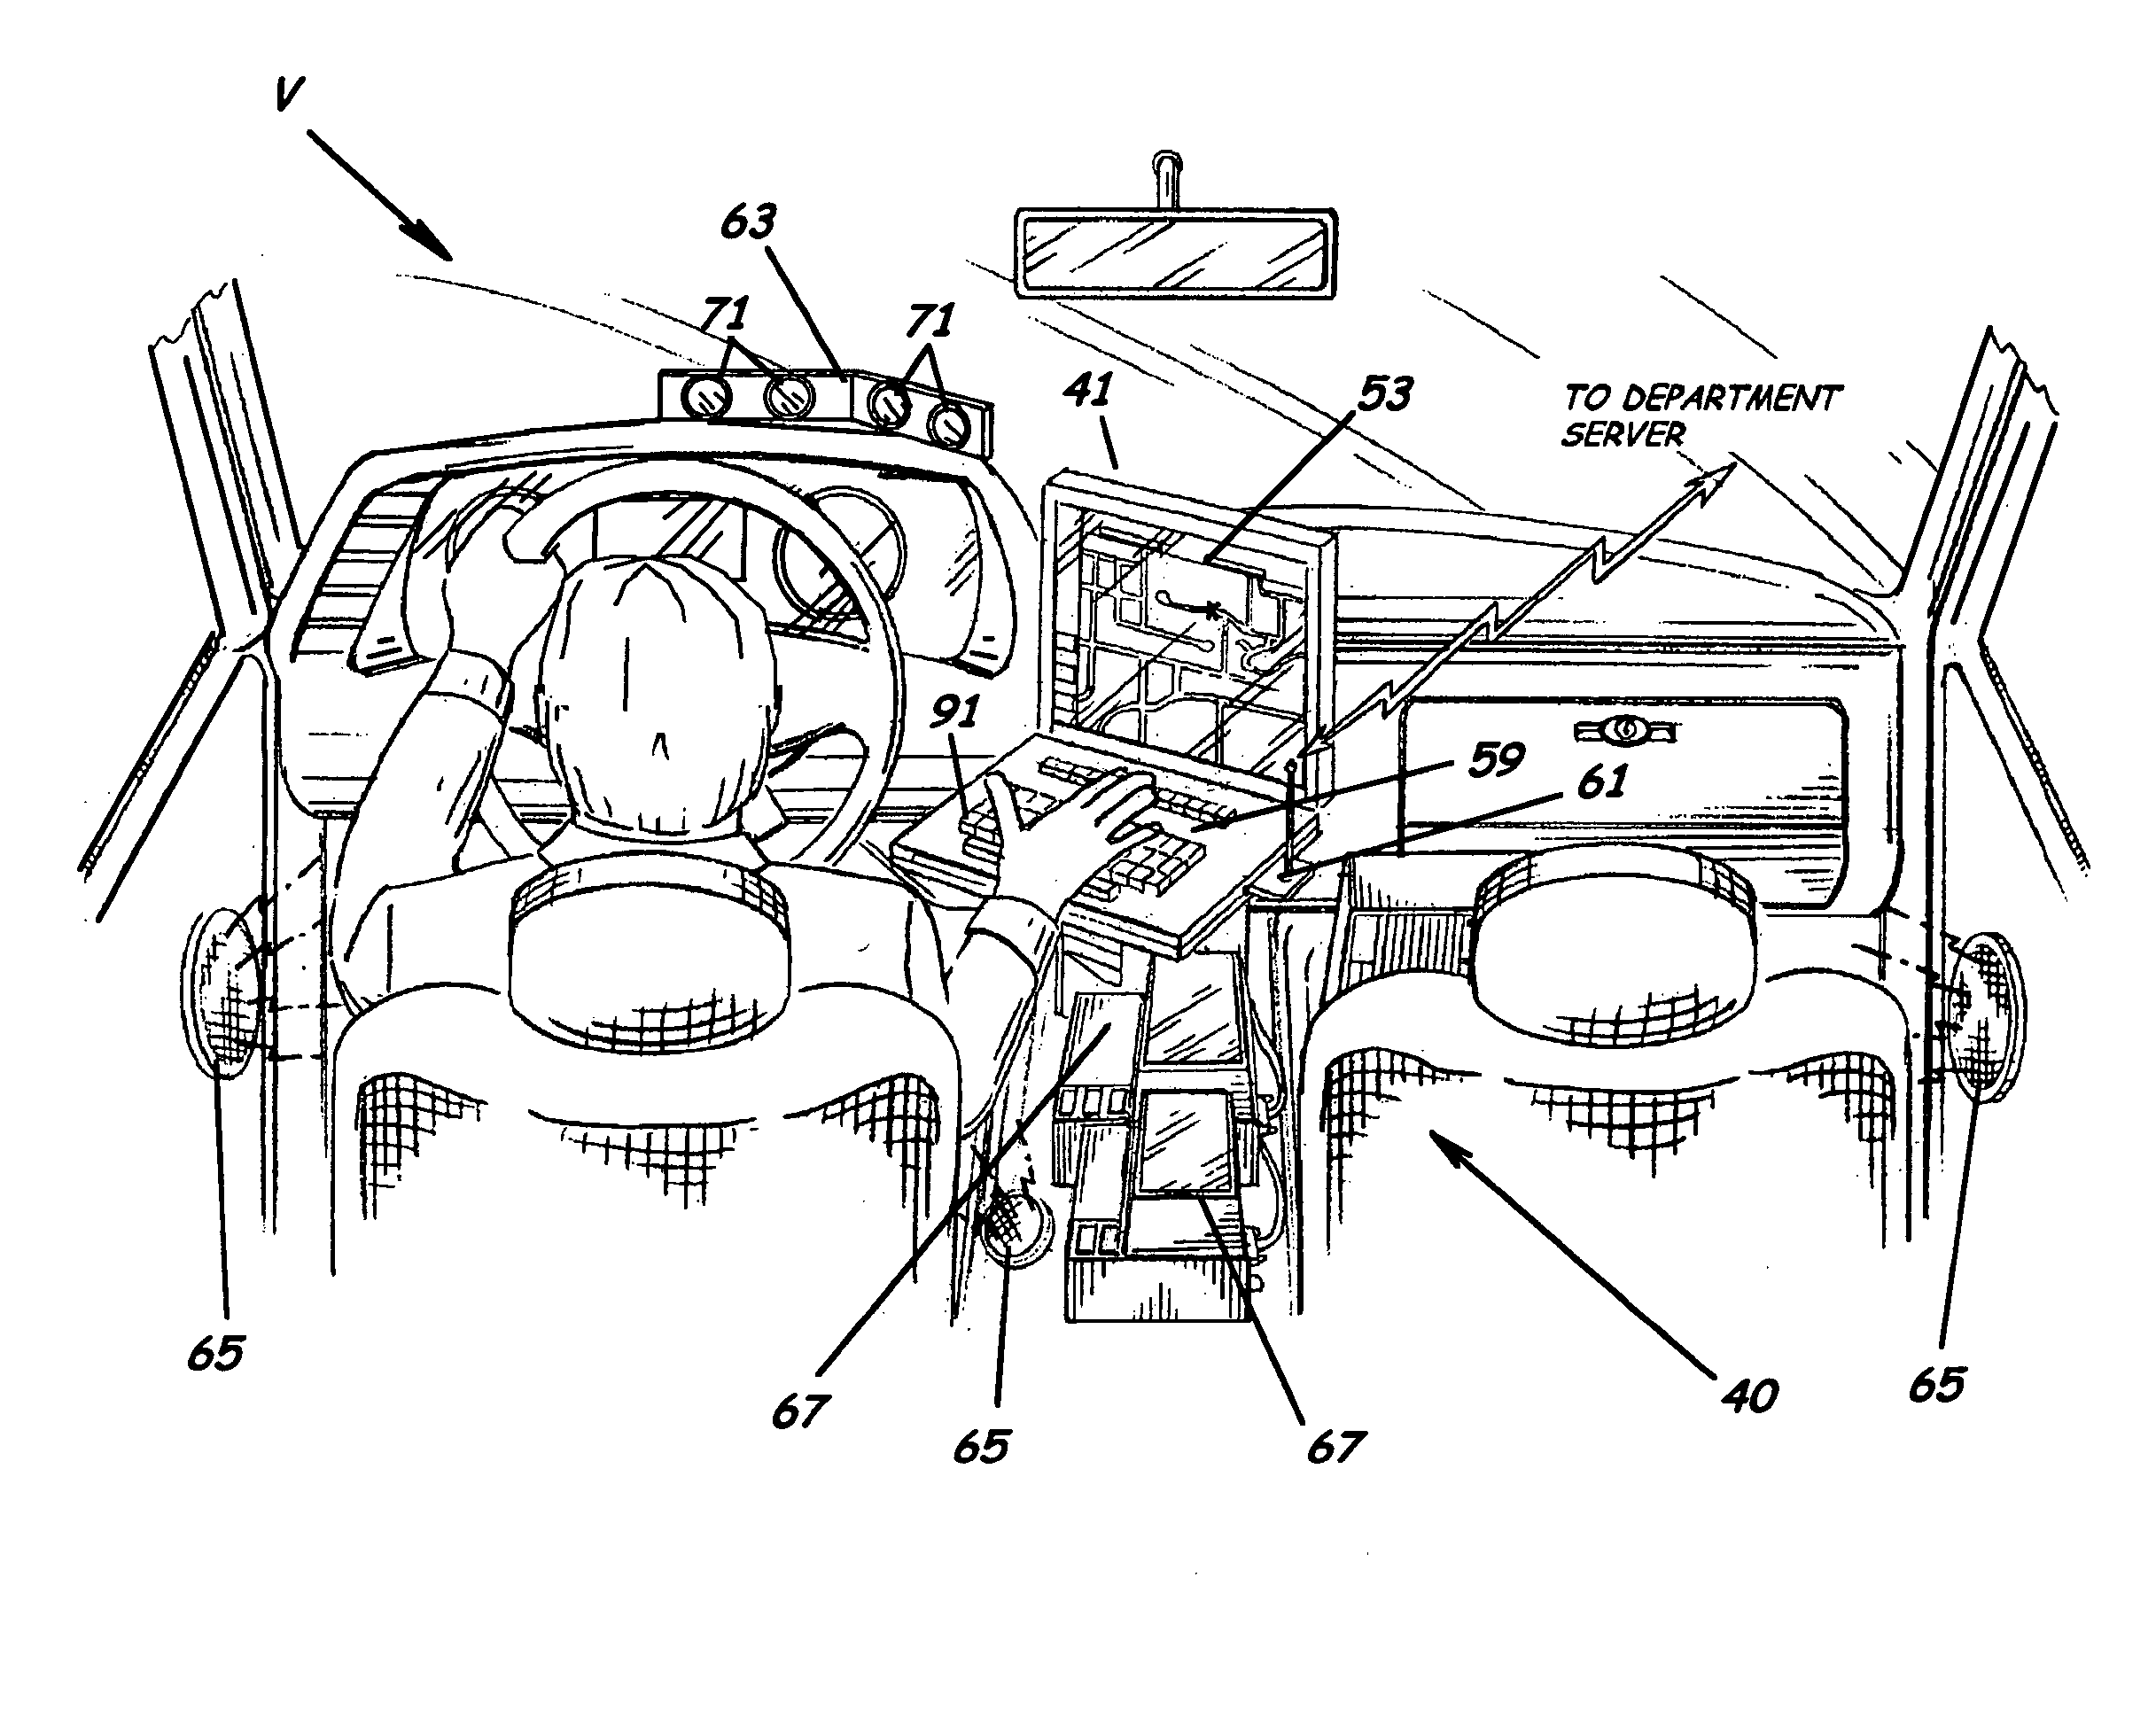 Apparatus for communicating with a vehicle during remote vehicle operations, program product, and associated methods